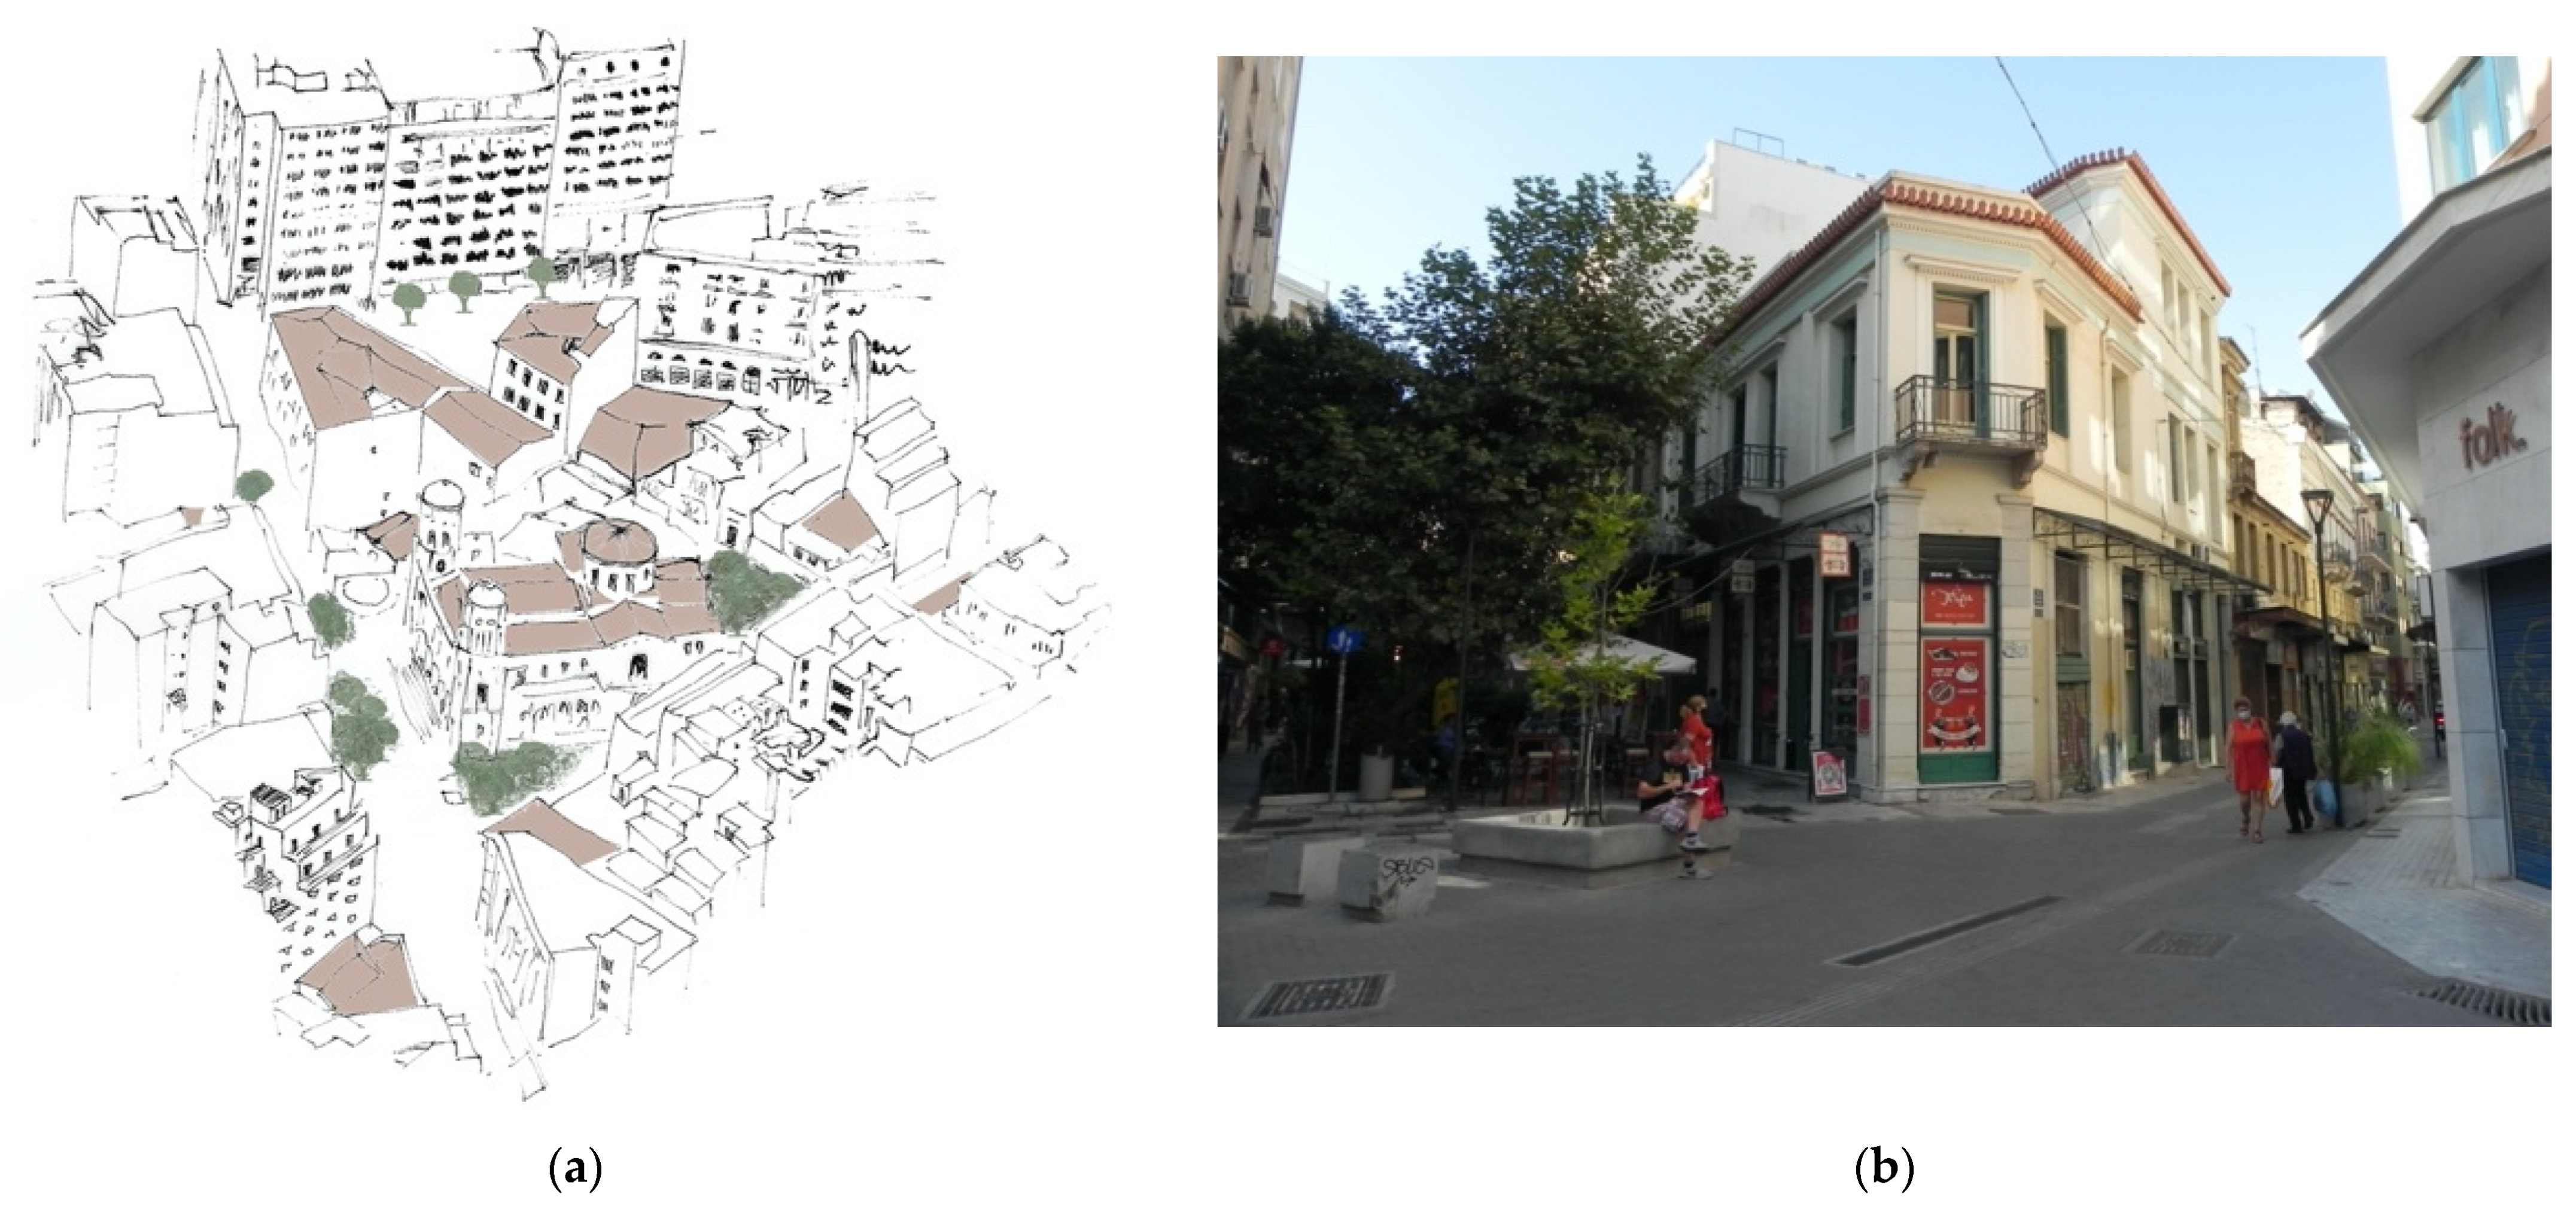 Land | Free Full-Text | Abandoned or Degraded Areas in Historic Cities: The  Importance of Multifunctional Reuse for Development through the Example of  the Historic Commercial Triangle (Emporiko Trigono) of Athens